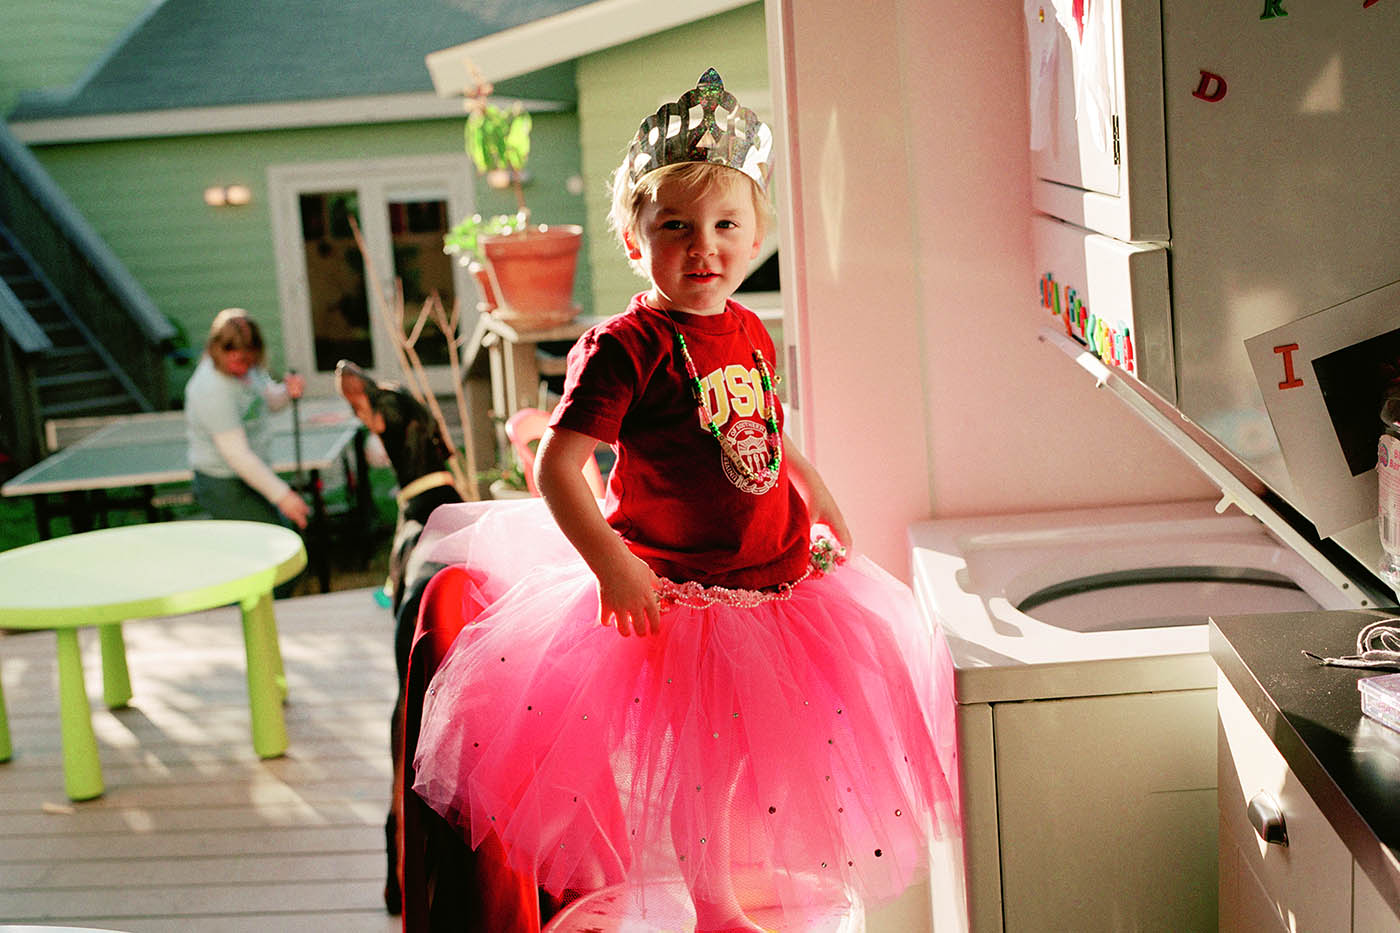 A young boy wearing a pink tutu and a silver tiara is standing on a kitchen chair in front of an open washing machine. The door is open behind him and a woman can be seen sweeping outside.